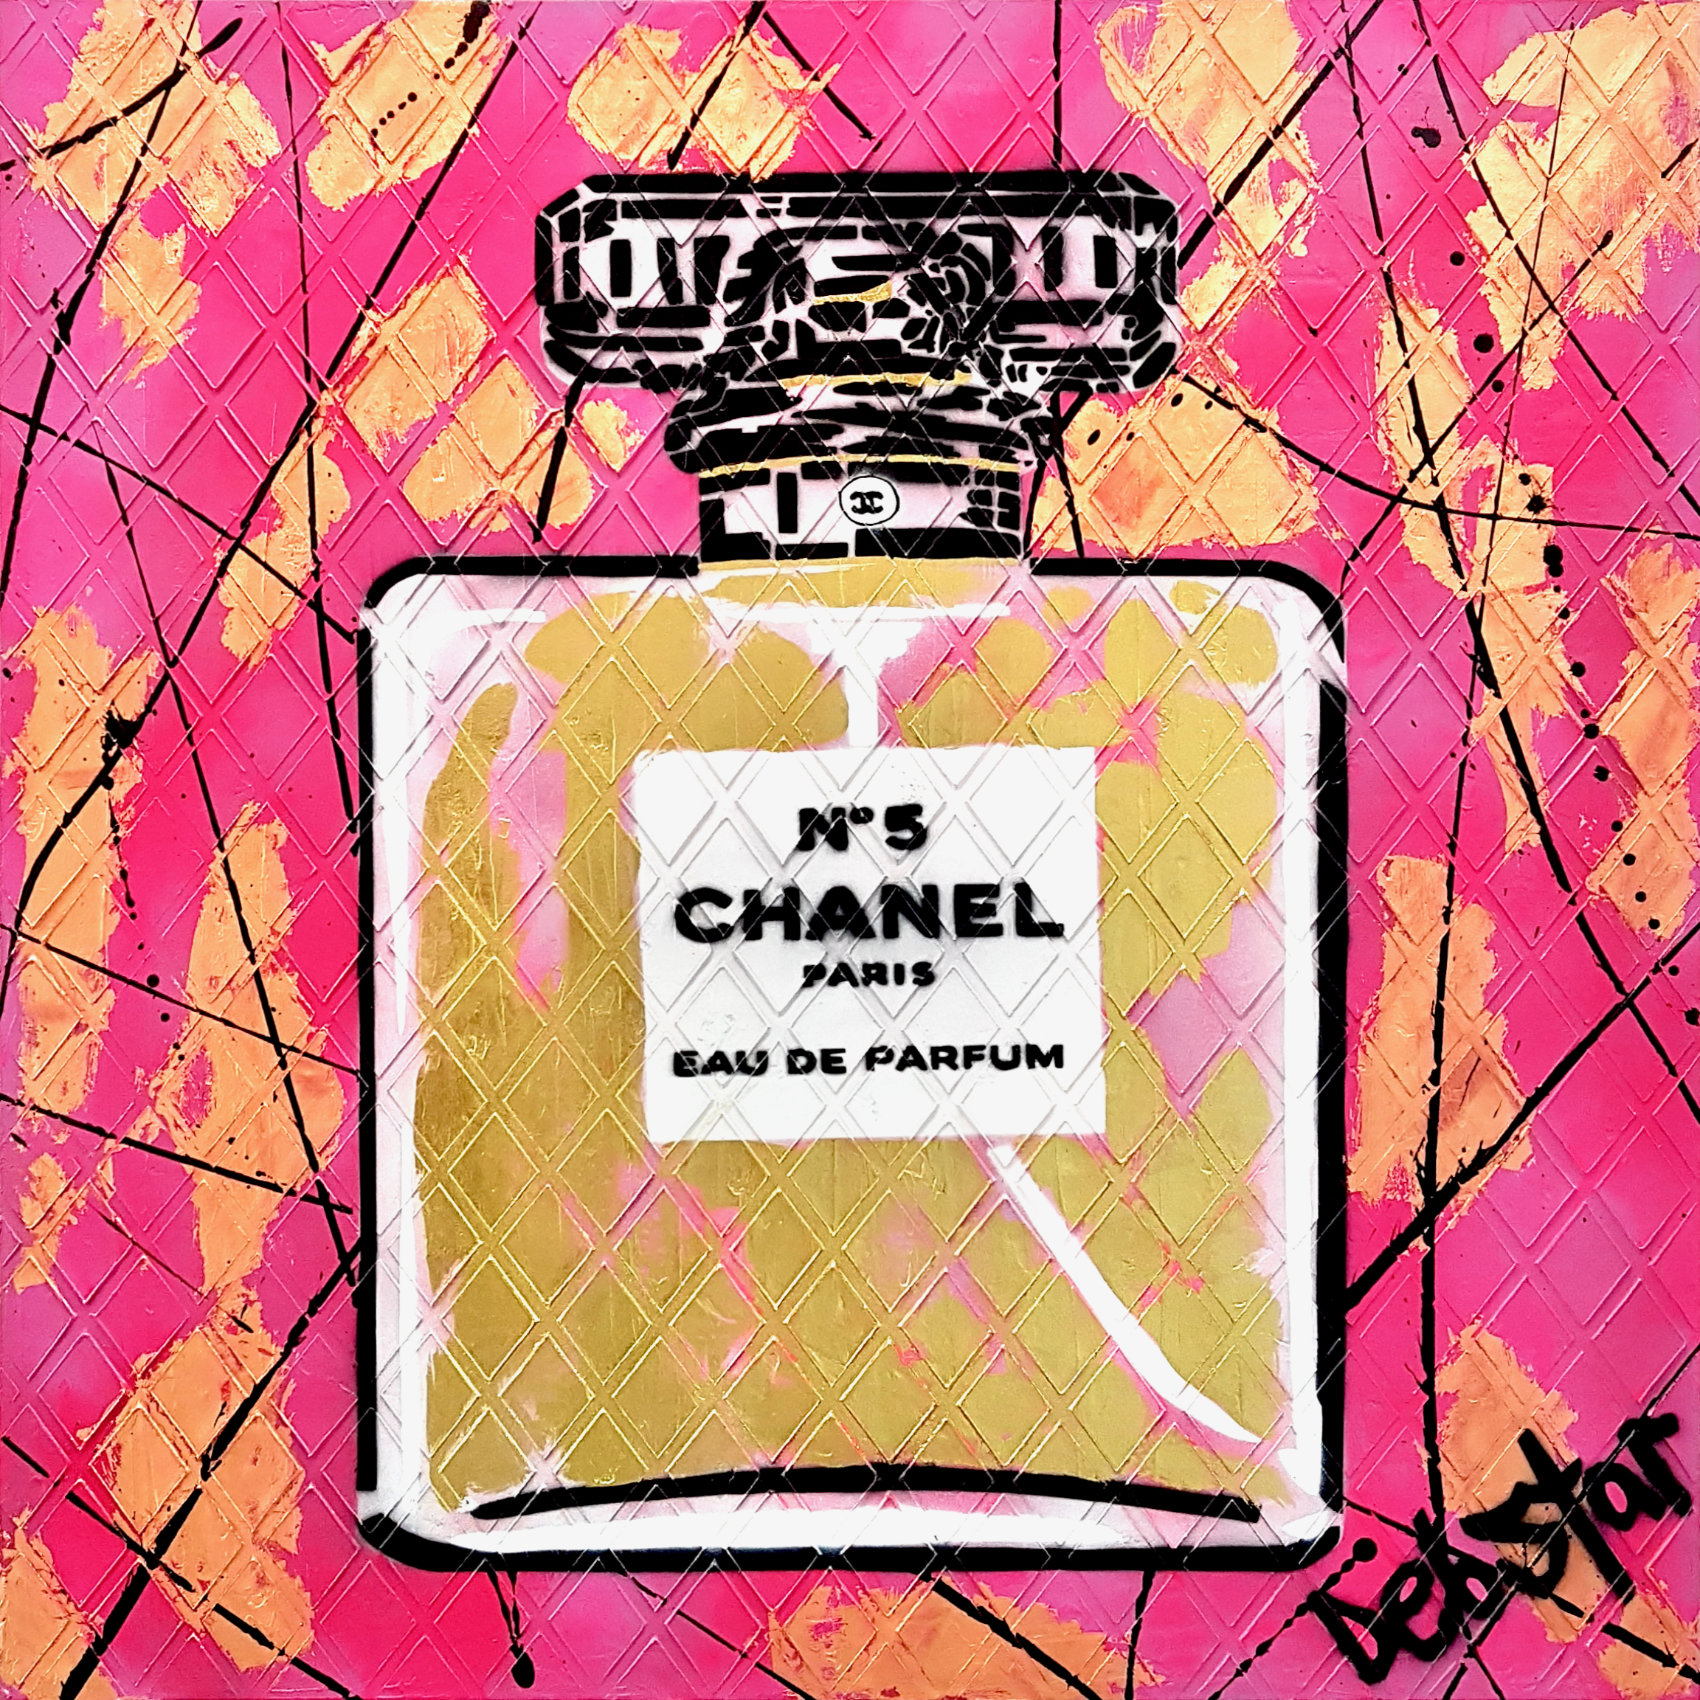 Chanel Coco Mademoiselle Perfume' Urban Pop Art Painting by